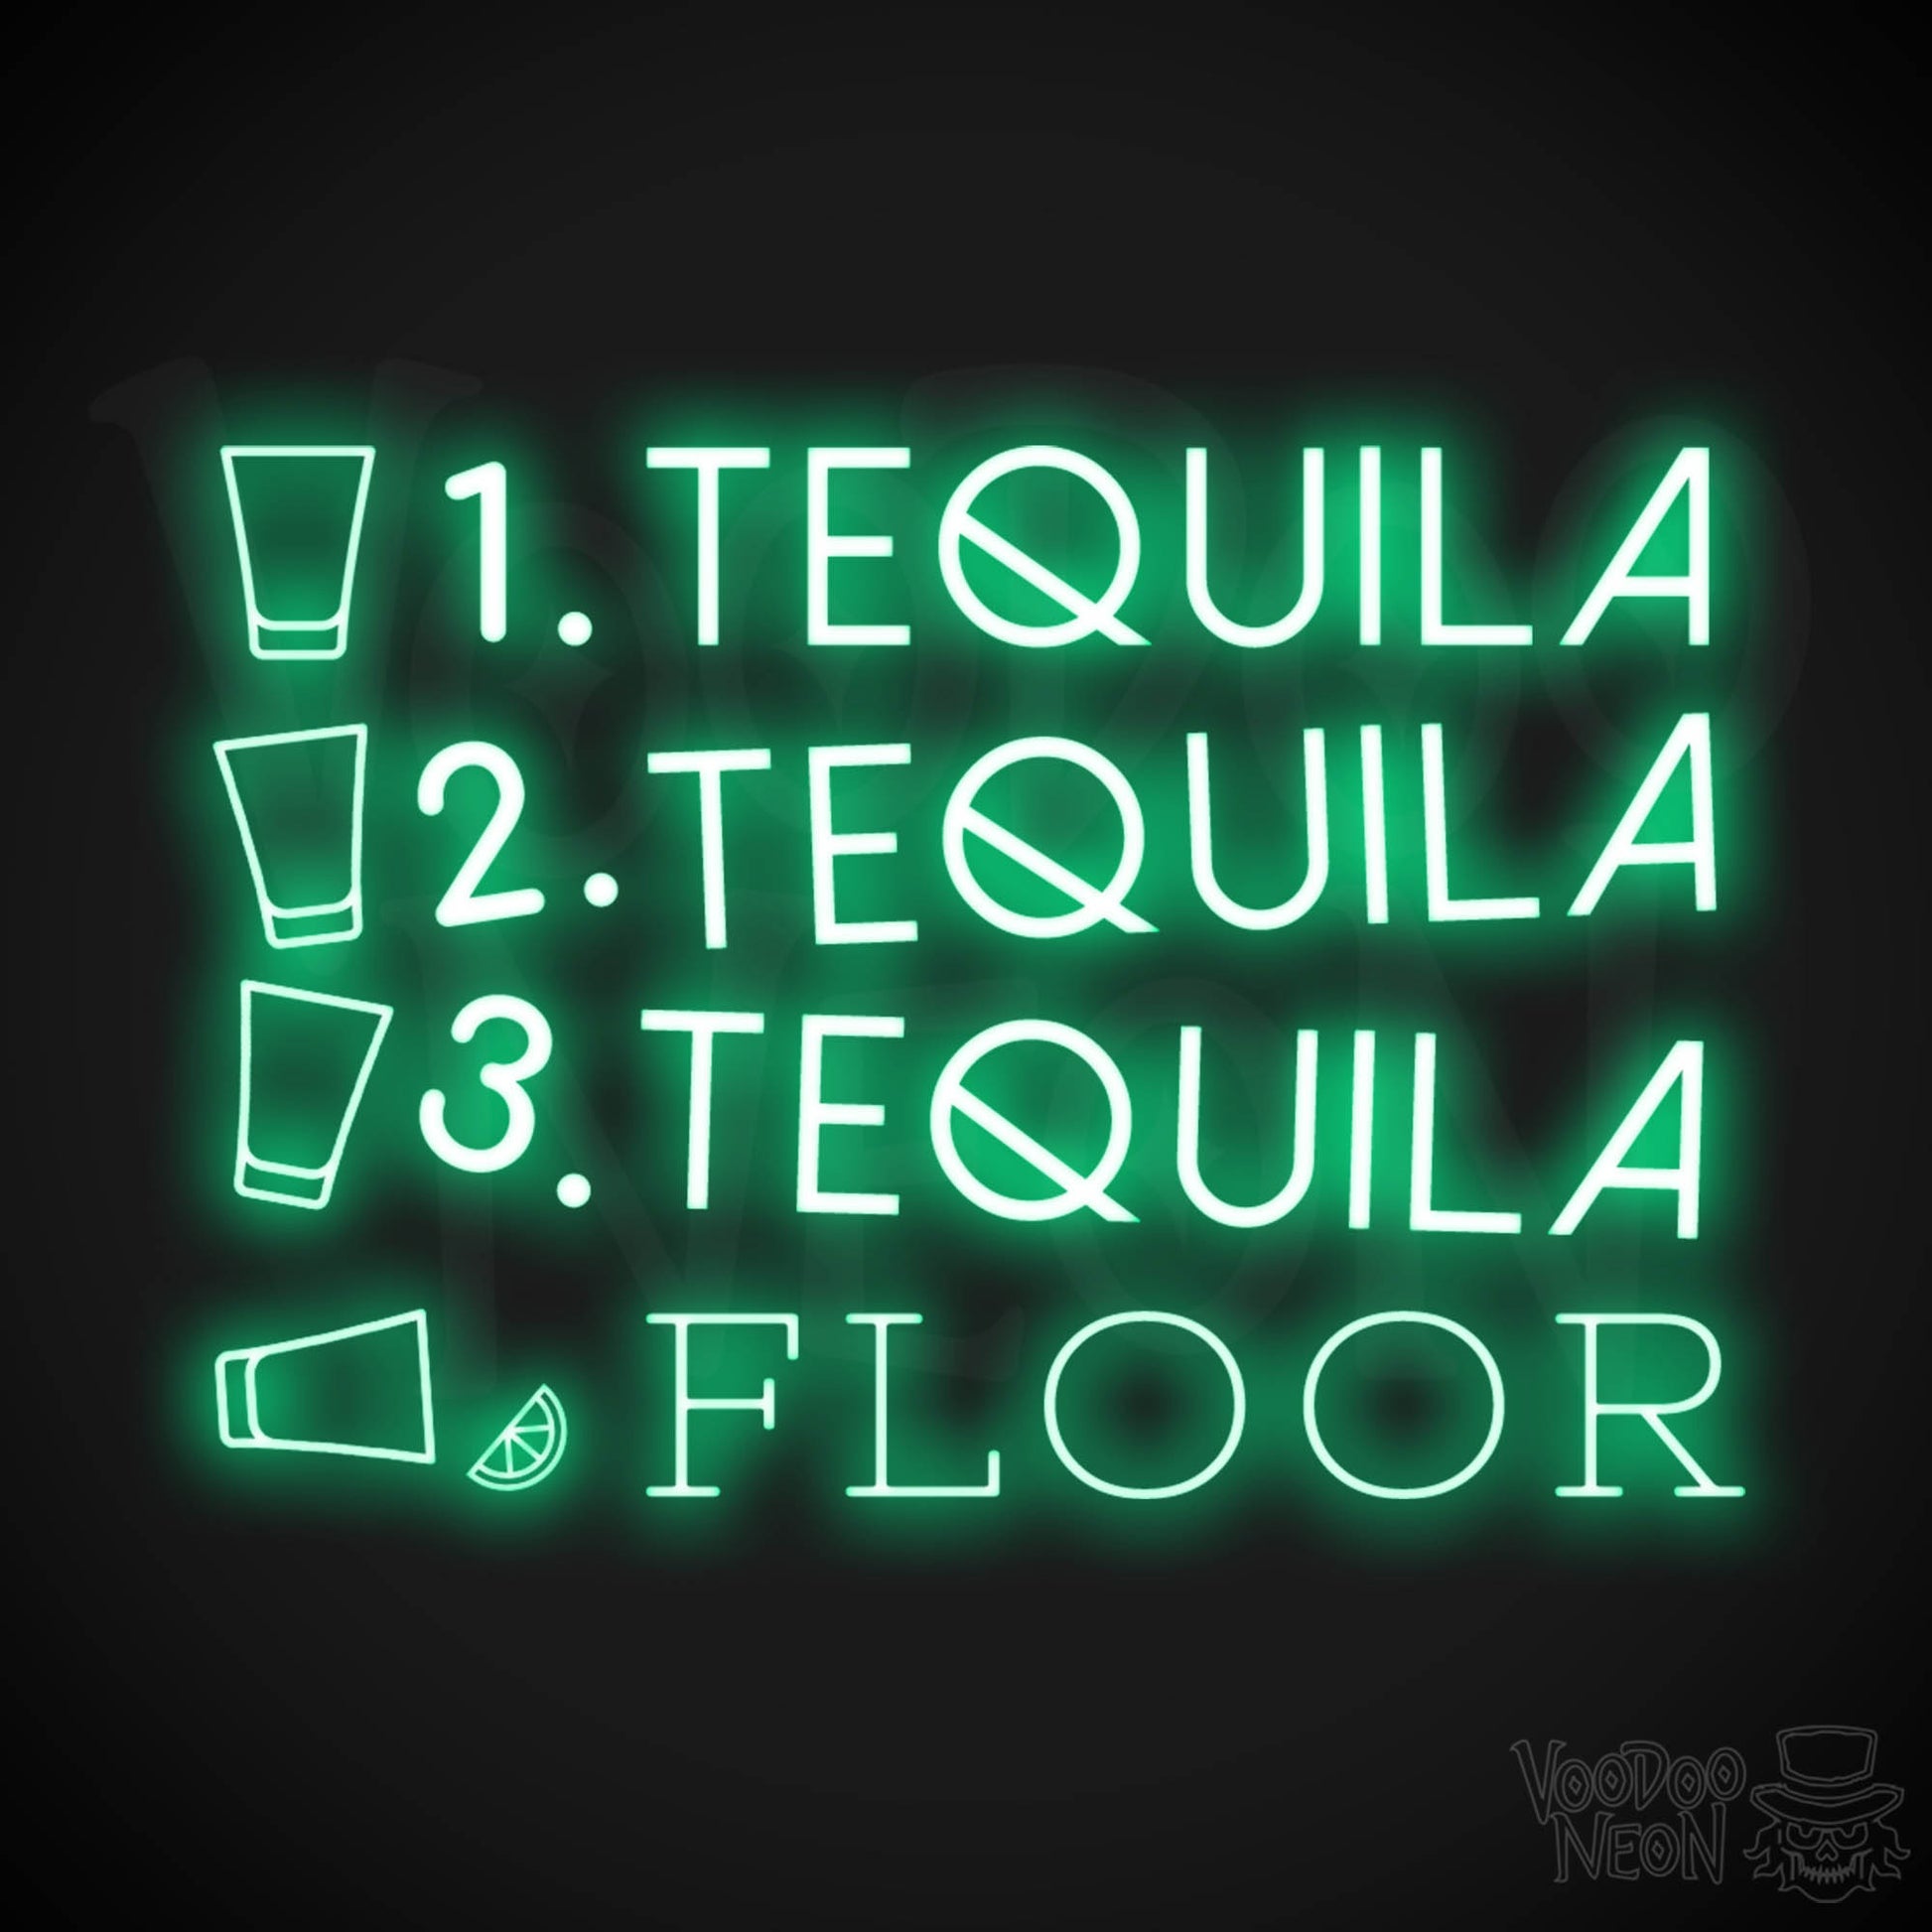 One Tequila Two Tequila Three Tequila Floor Neon sign - Neon Wall Art - Color Green